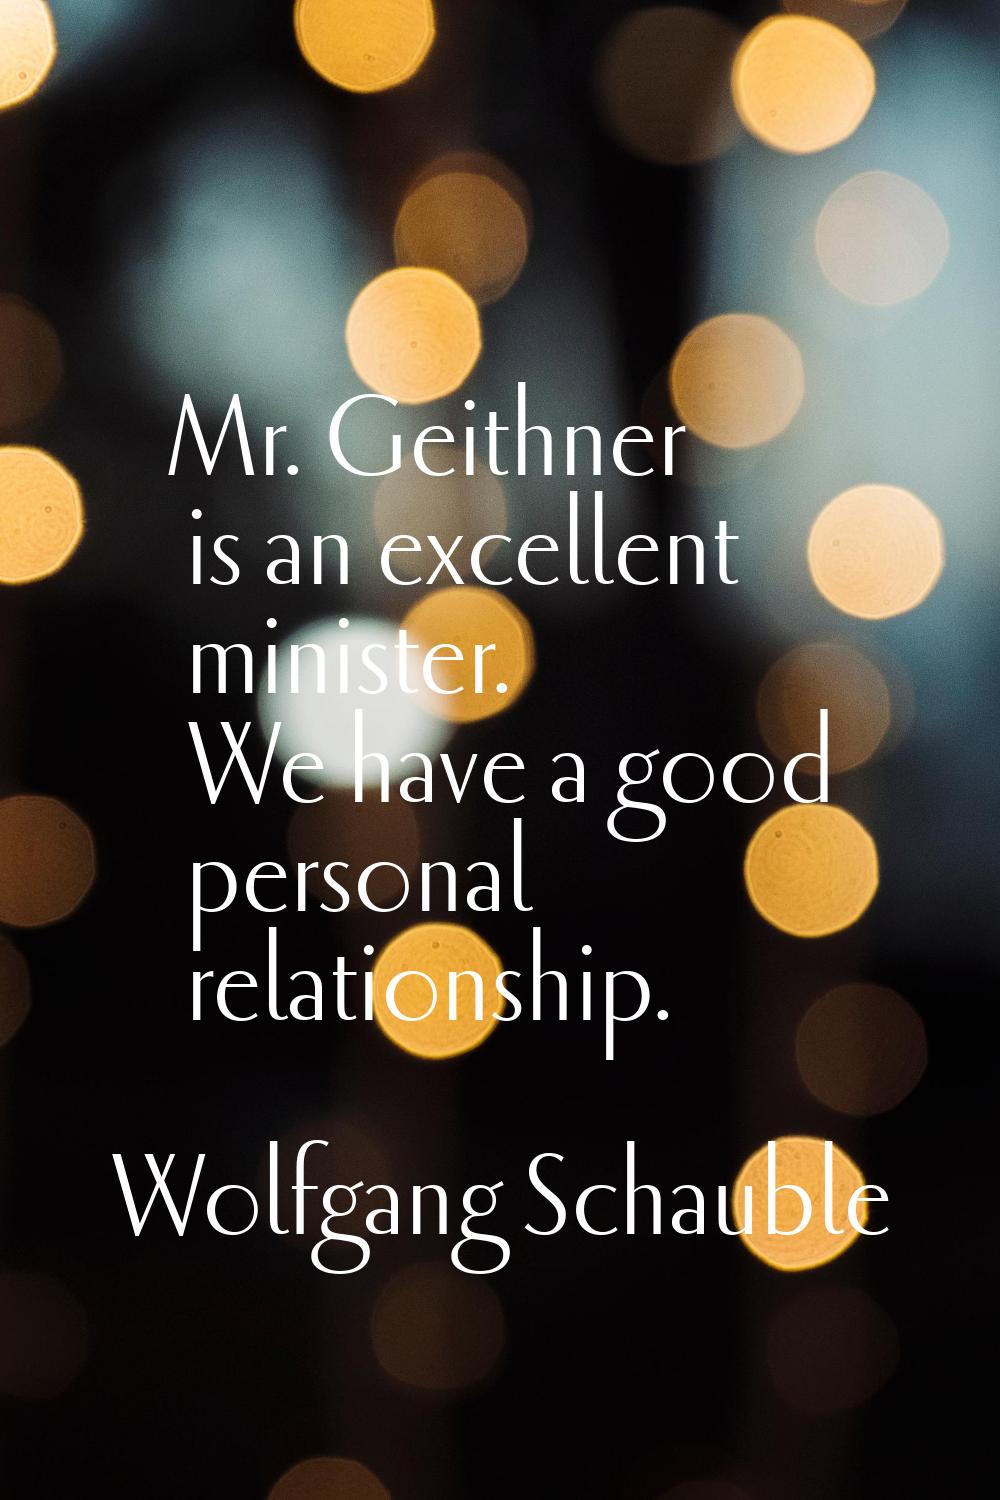 Mr. Geithner is an excellent minister. We have a good personal relationship.